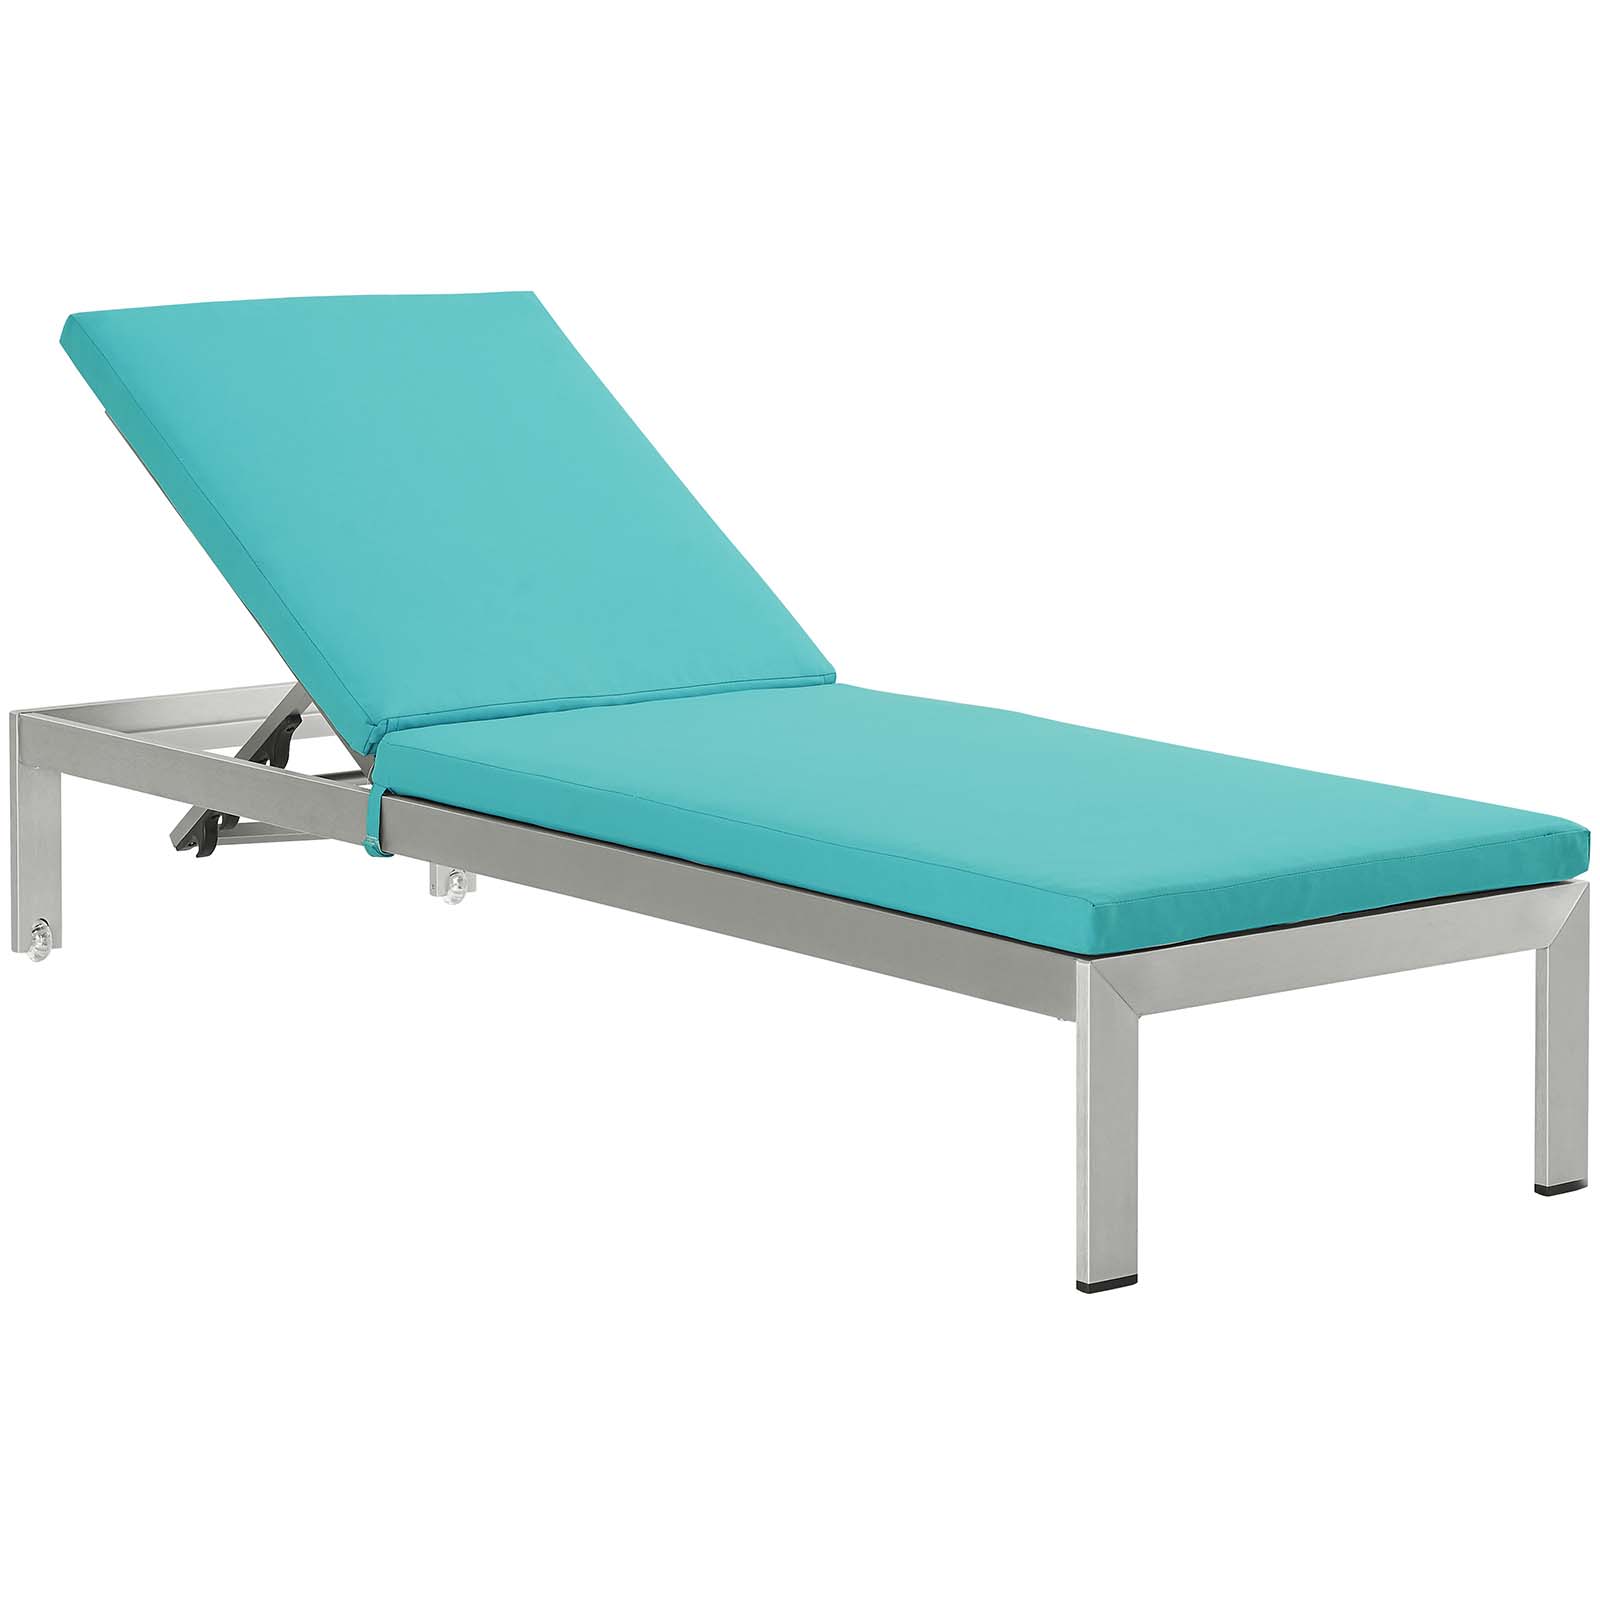 Modern Contemporary Urban Design Outdoor Patio Balcony Chaise Lounge Chair ( Set of 2), Blue, Aluminum - image 3 of 6